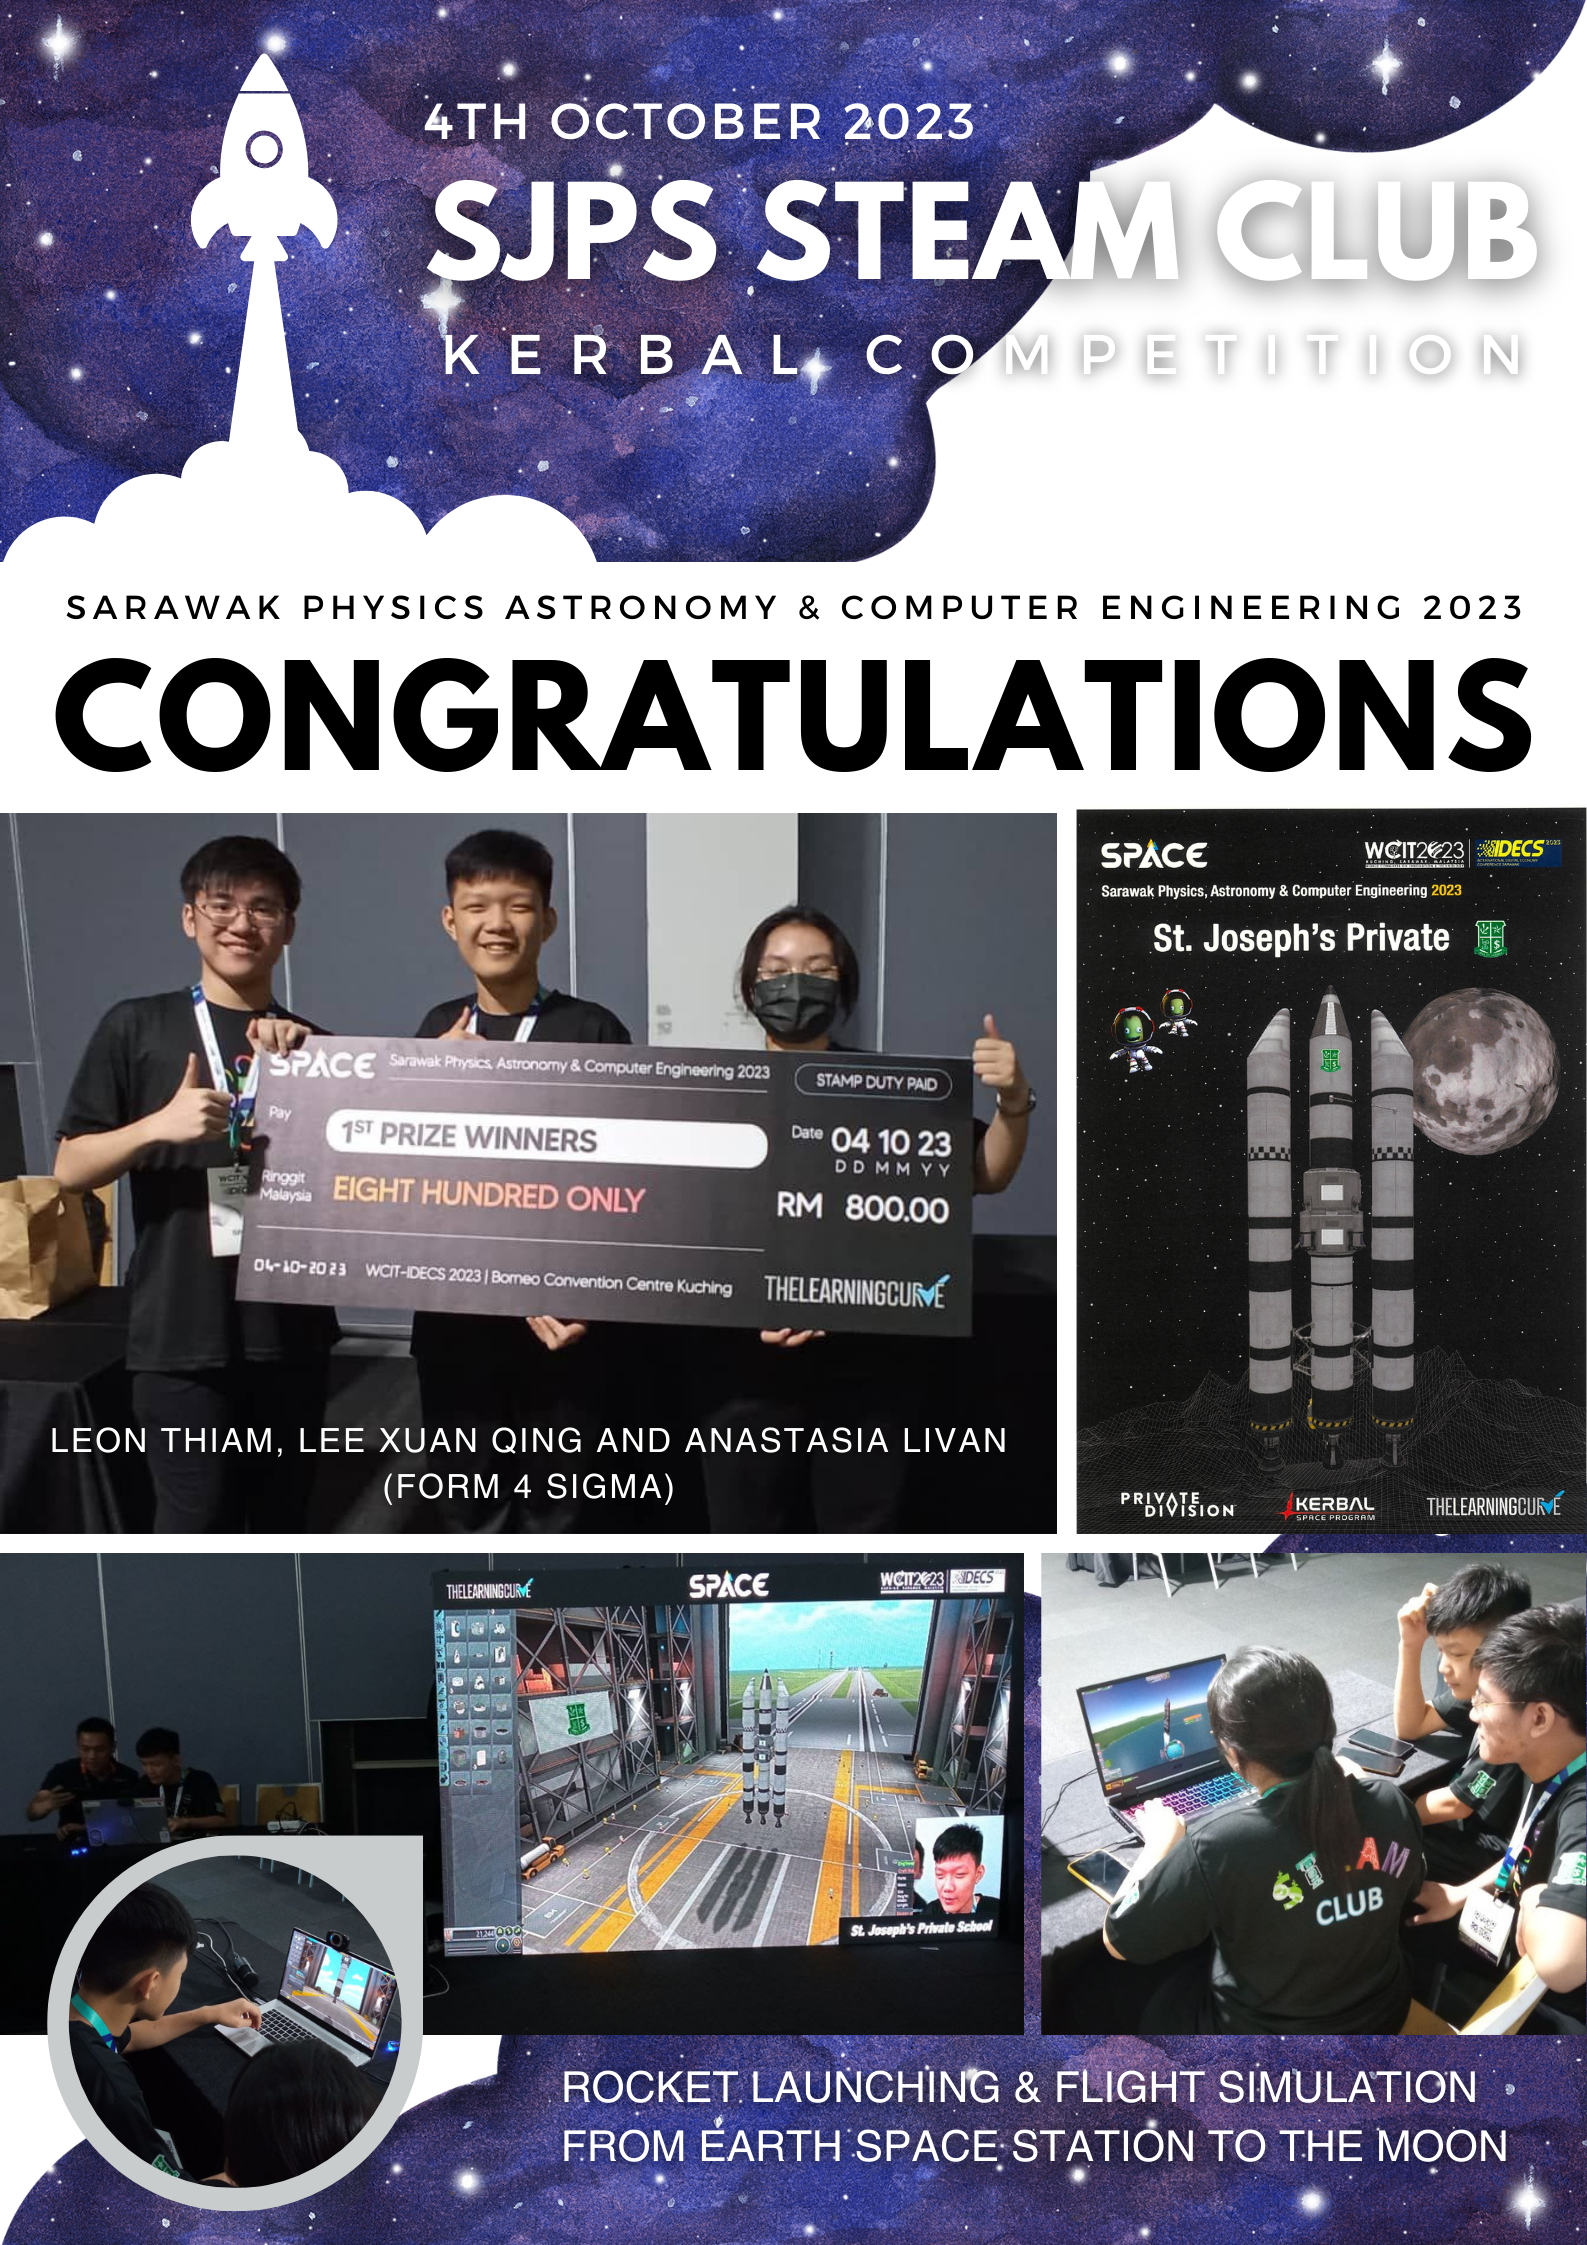 CONGRATULATIONS TO SJPS STEAM CLUB MEMBERS ON WINNING 1ST PRIZE IN THE KERBAL COMPETITION 2023!